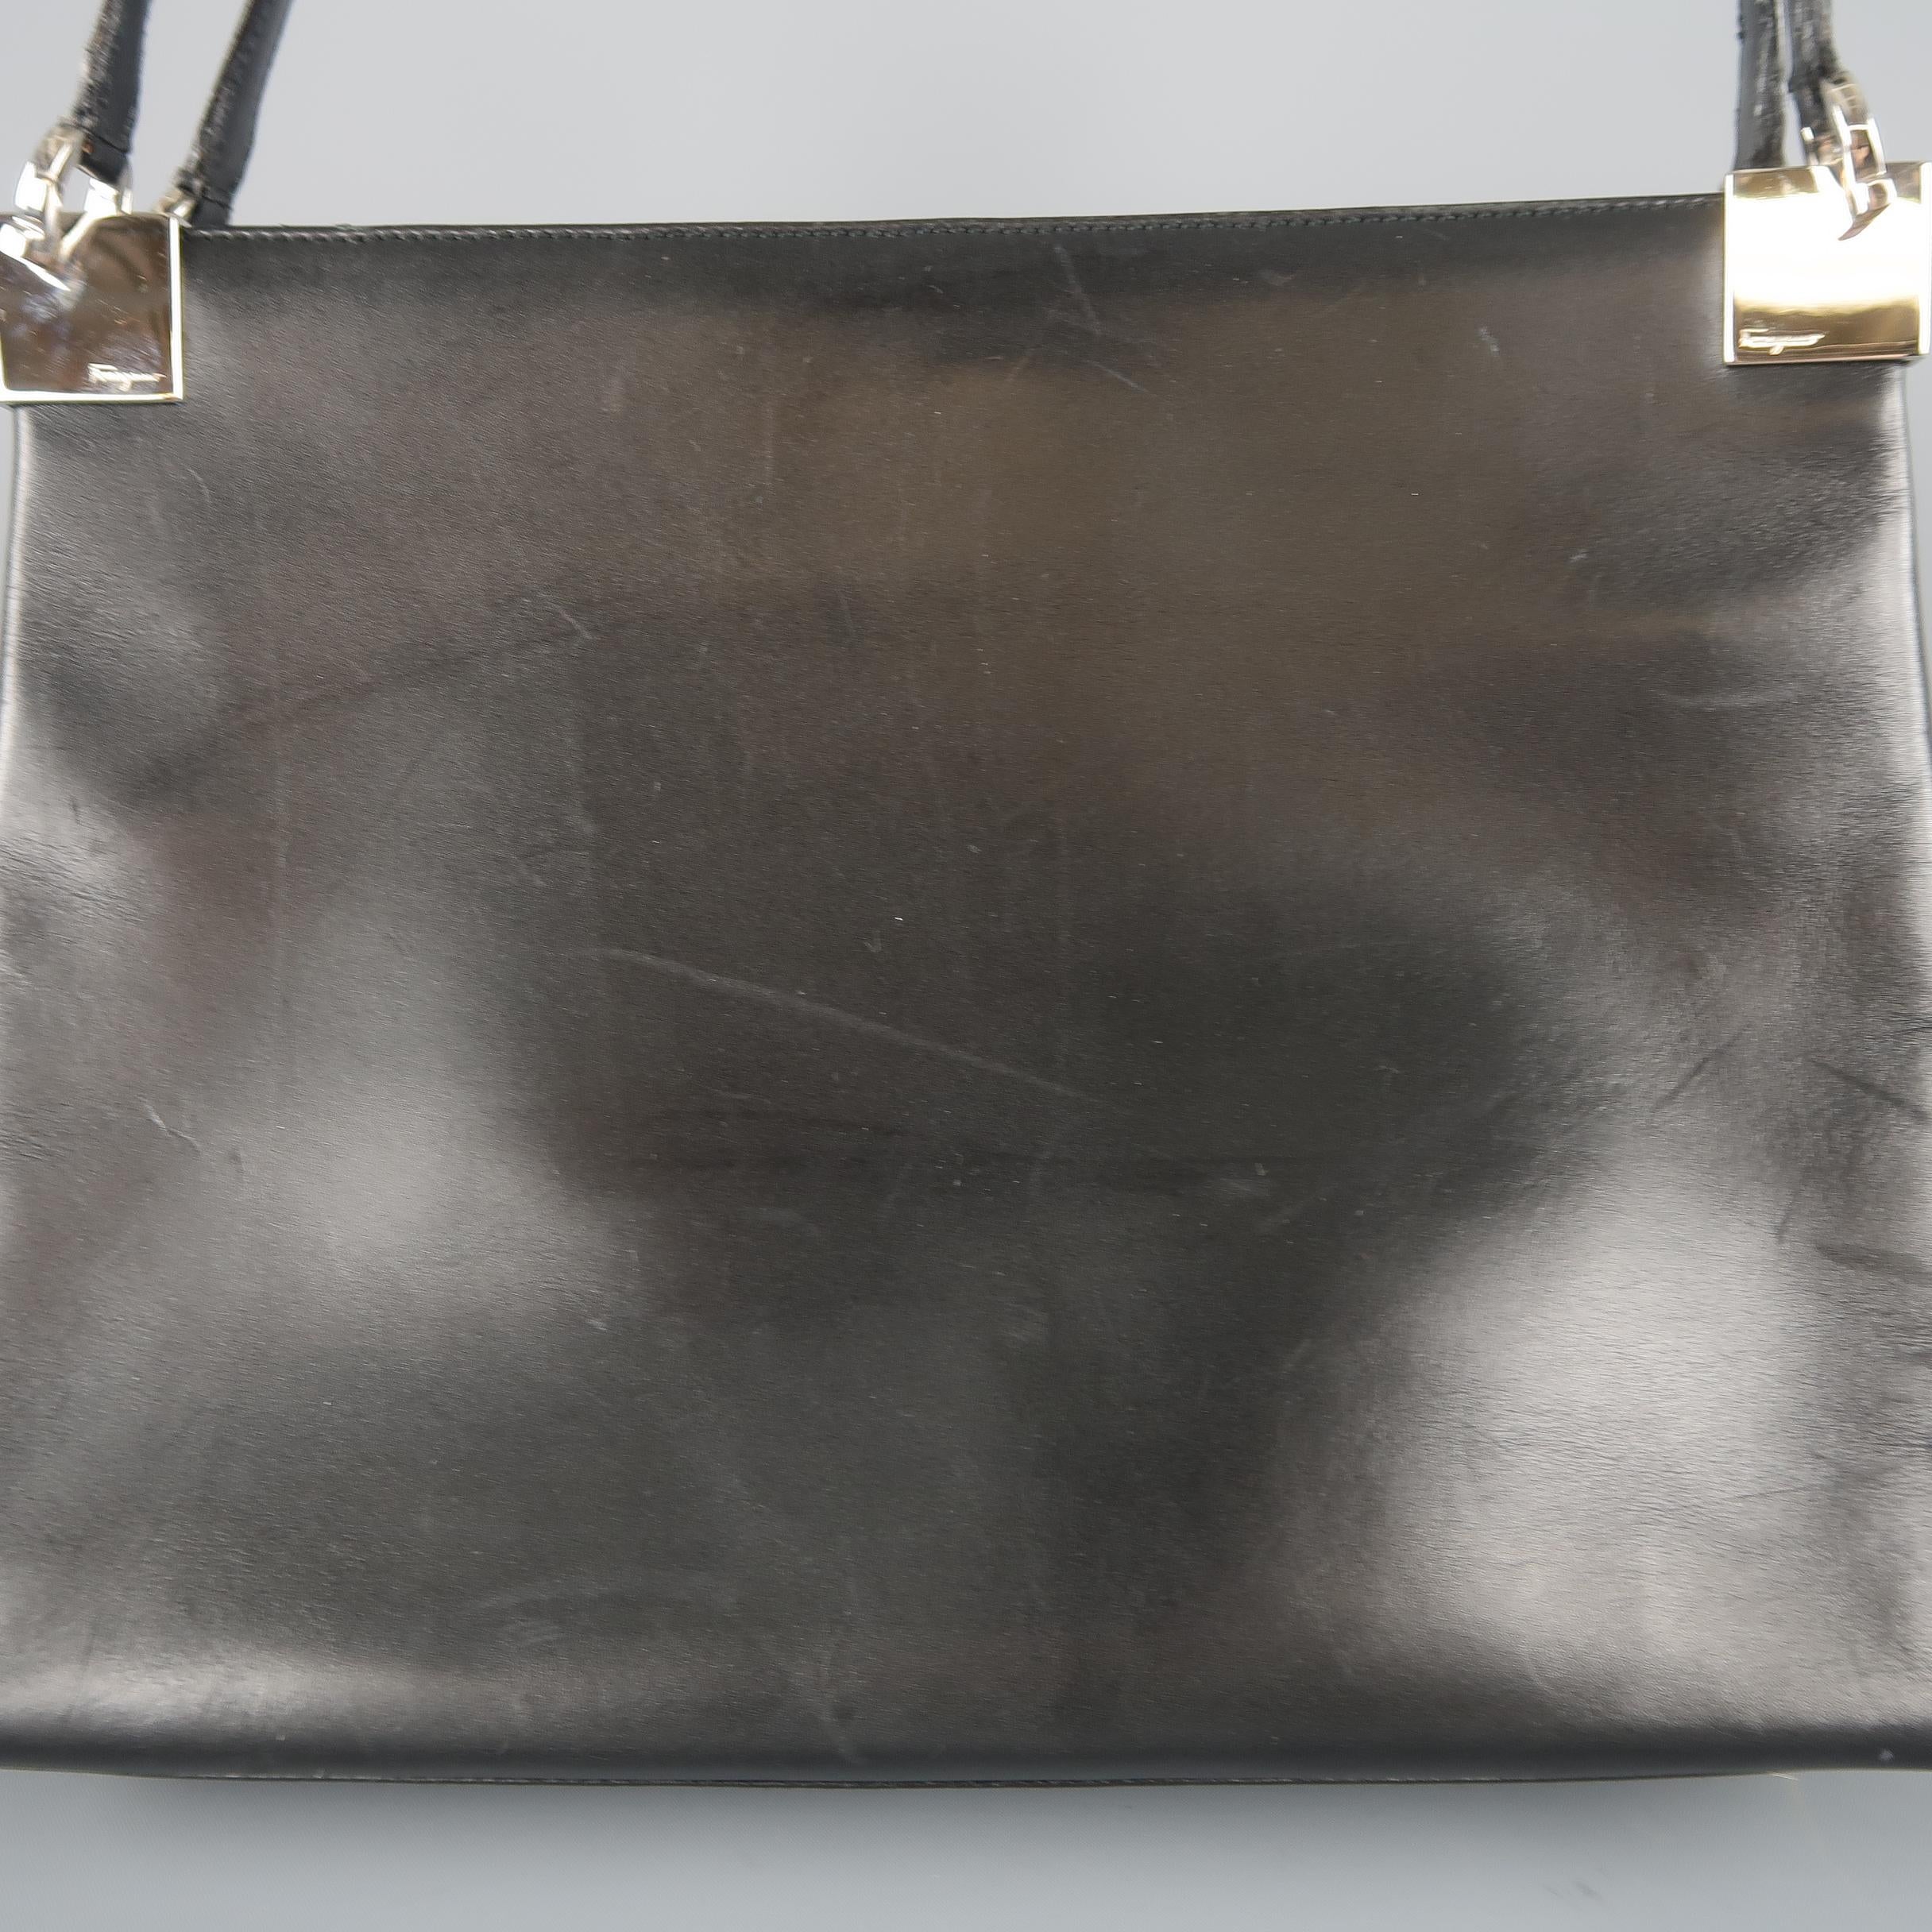 Vintage SALVATORE FERRAGAMO shoulder bag comes in smooth black leather with a double compartment interior, snap top closure, silver tone metal Gancini bit embossed hardware, and double leather shoulder straps. Wear throughout. As-is. Made in Italy.
